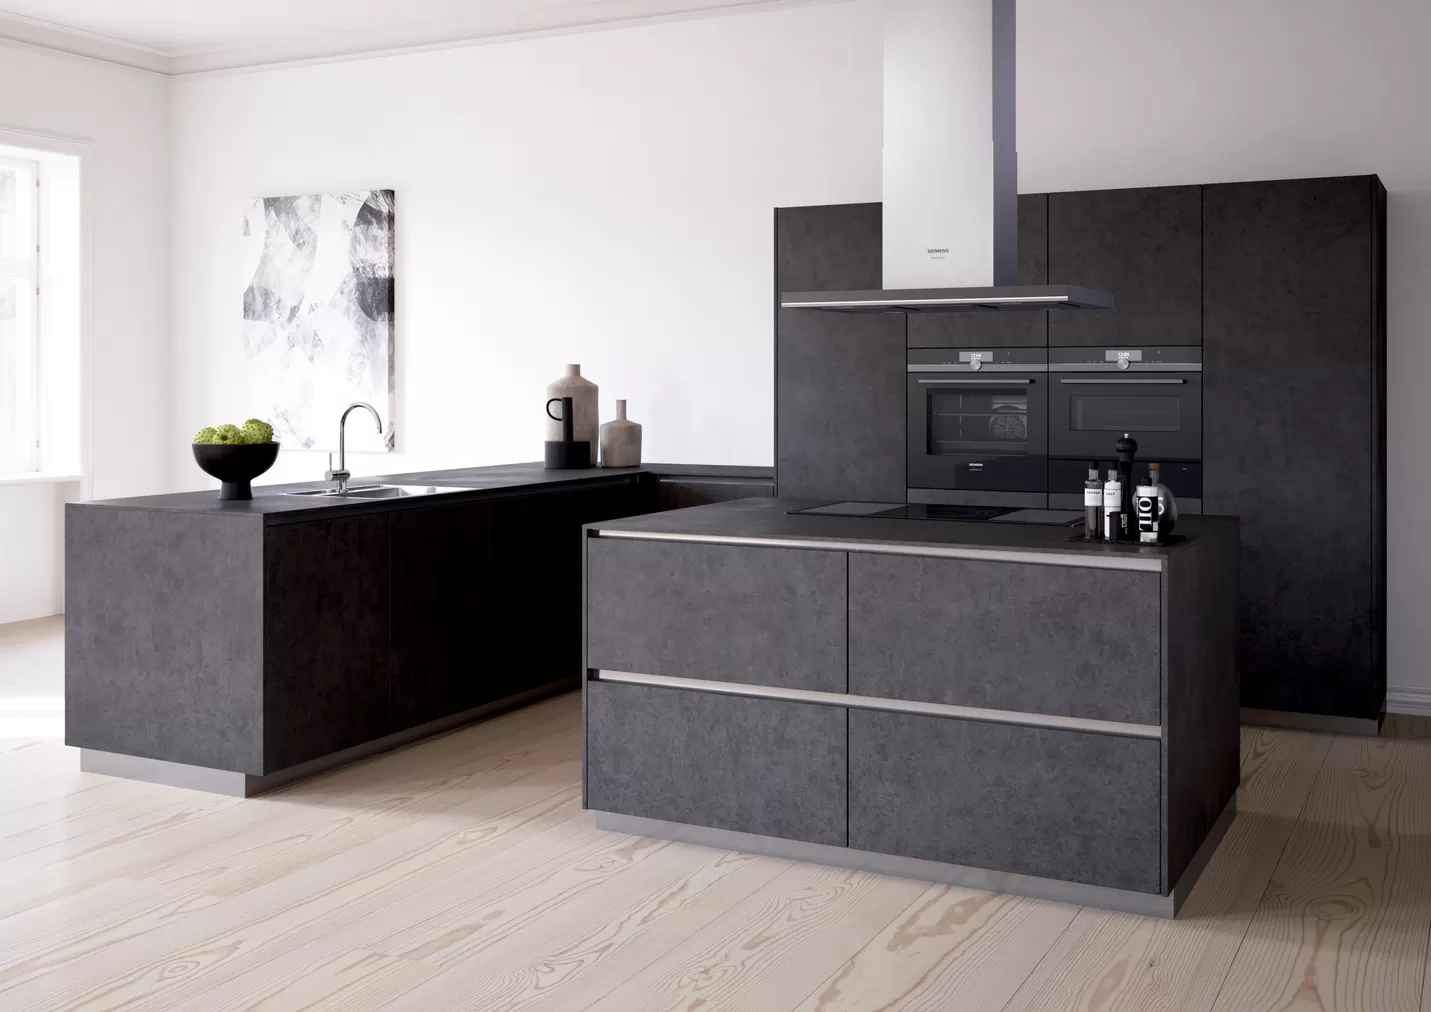 monochrome black kitchen with black appliances and a kitchen island with wooden floors